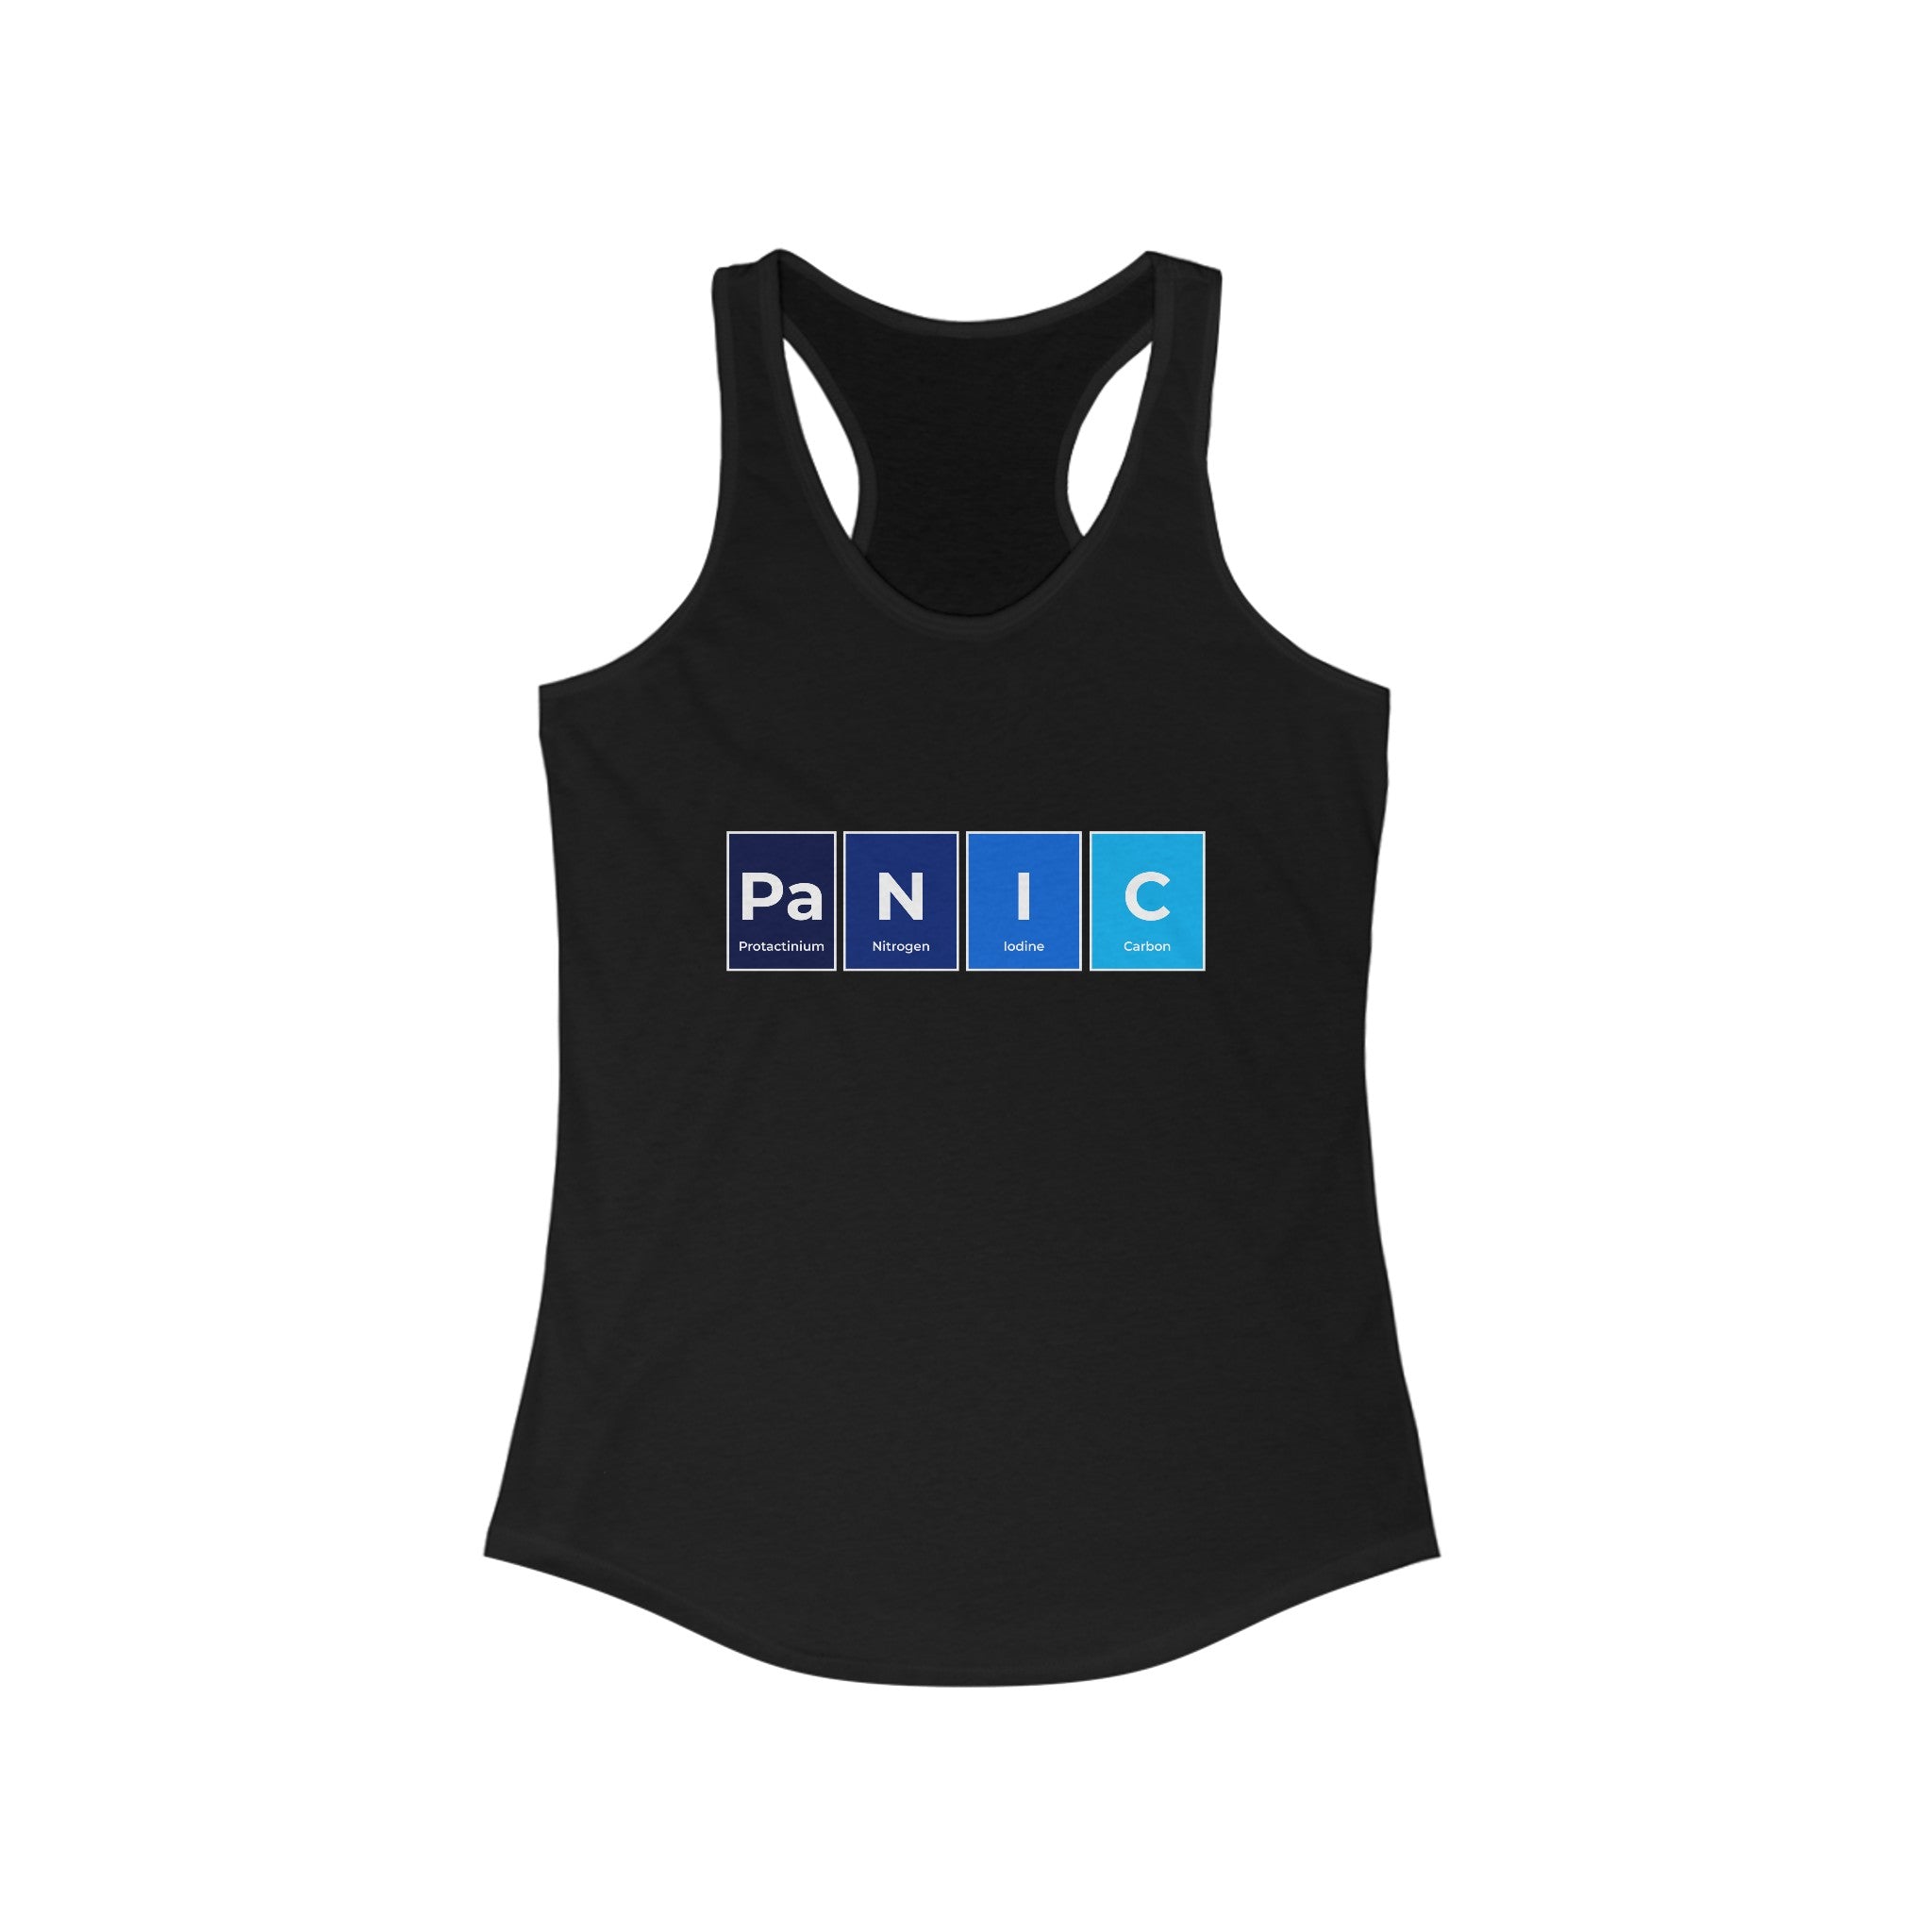 Pa-N-I-C - Women's Racerback Tank featuring a lightweight Pa-N-I-C design, with the word "PANIC" spelled using elements from the periodic table on the front.